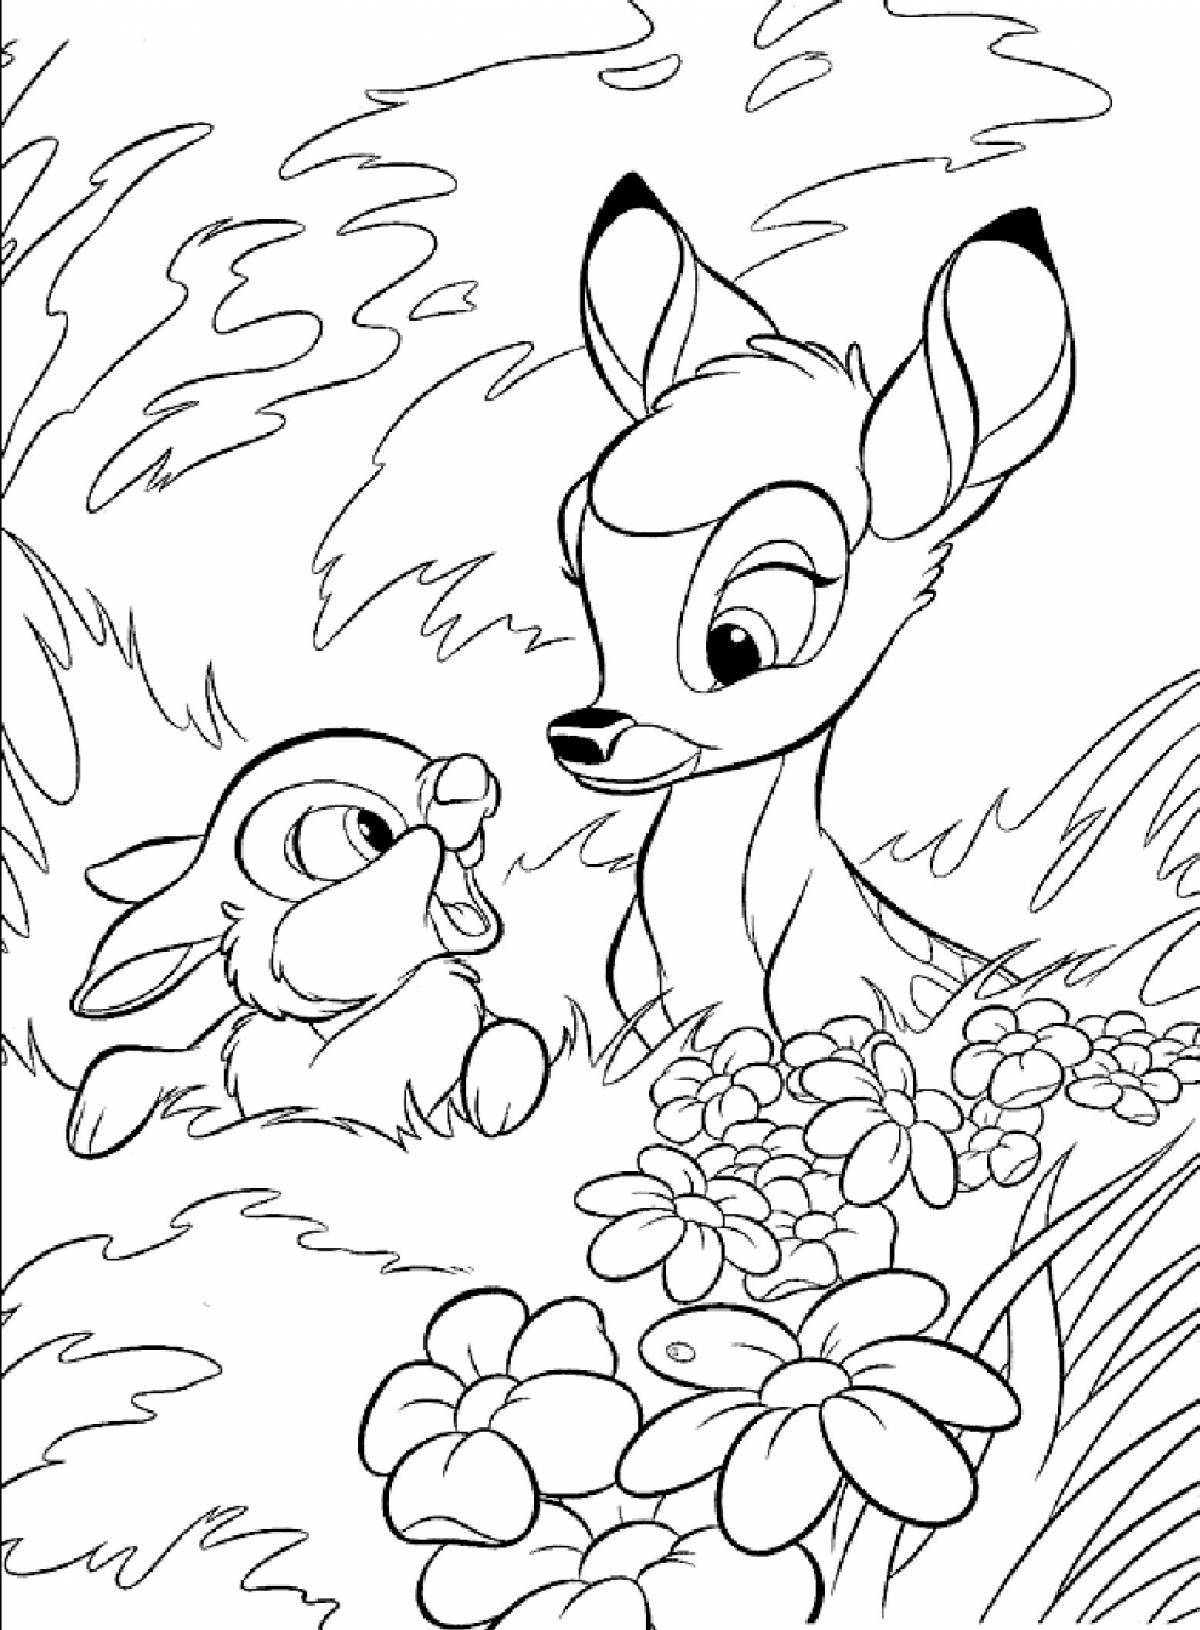 Disney fun coloring book for kids 6-7 years old